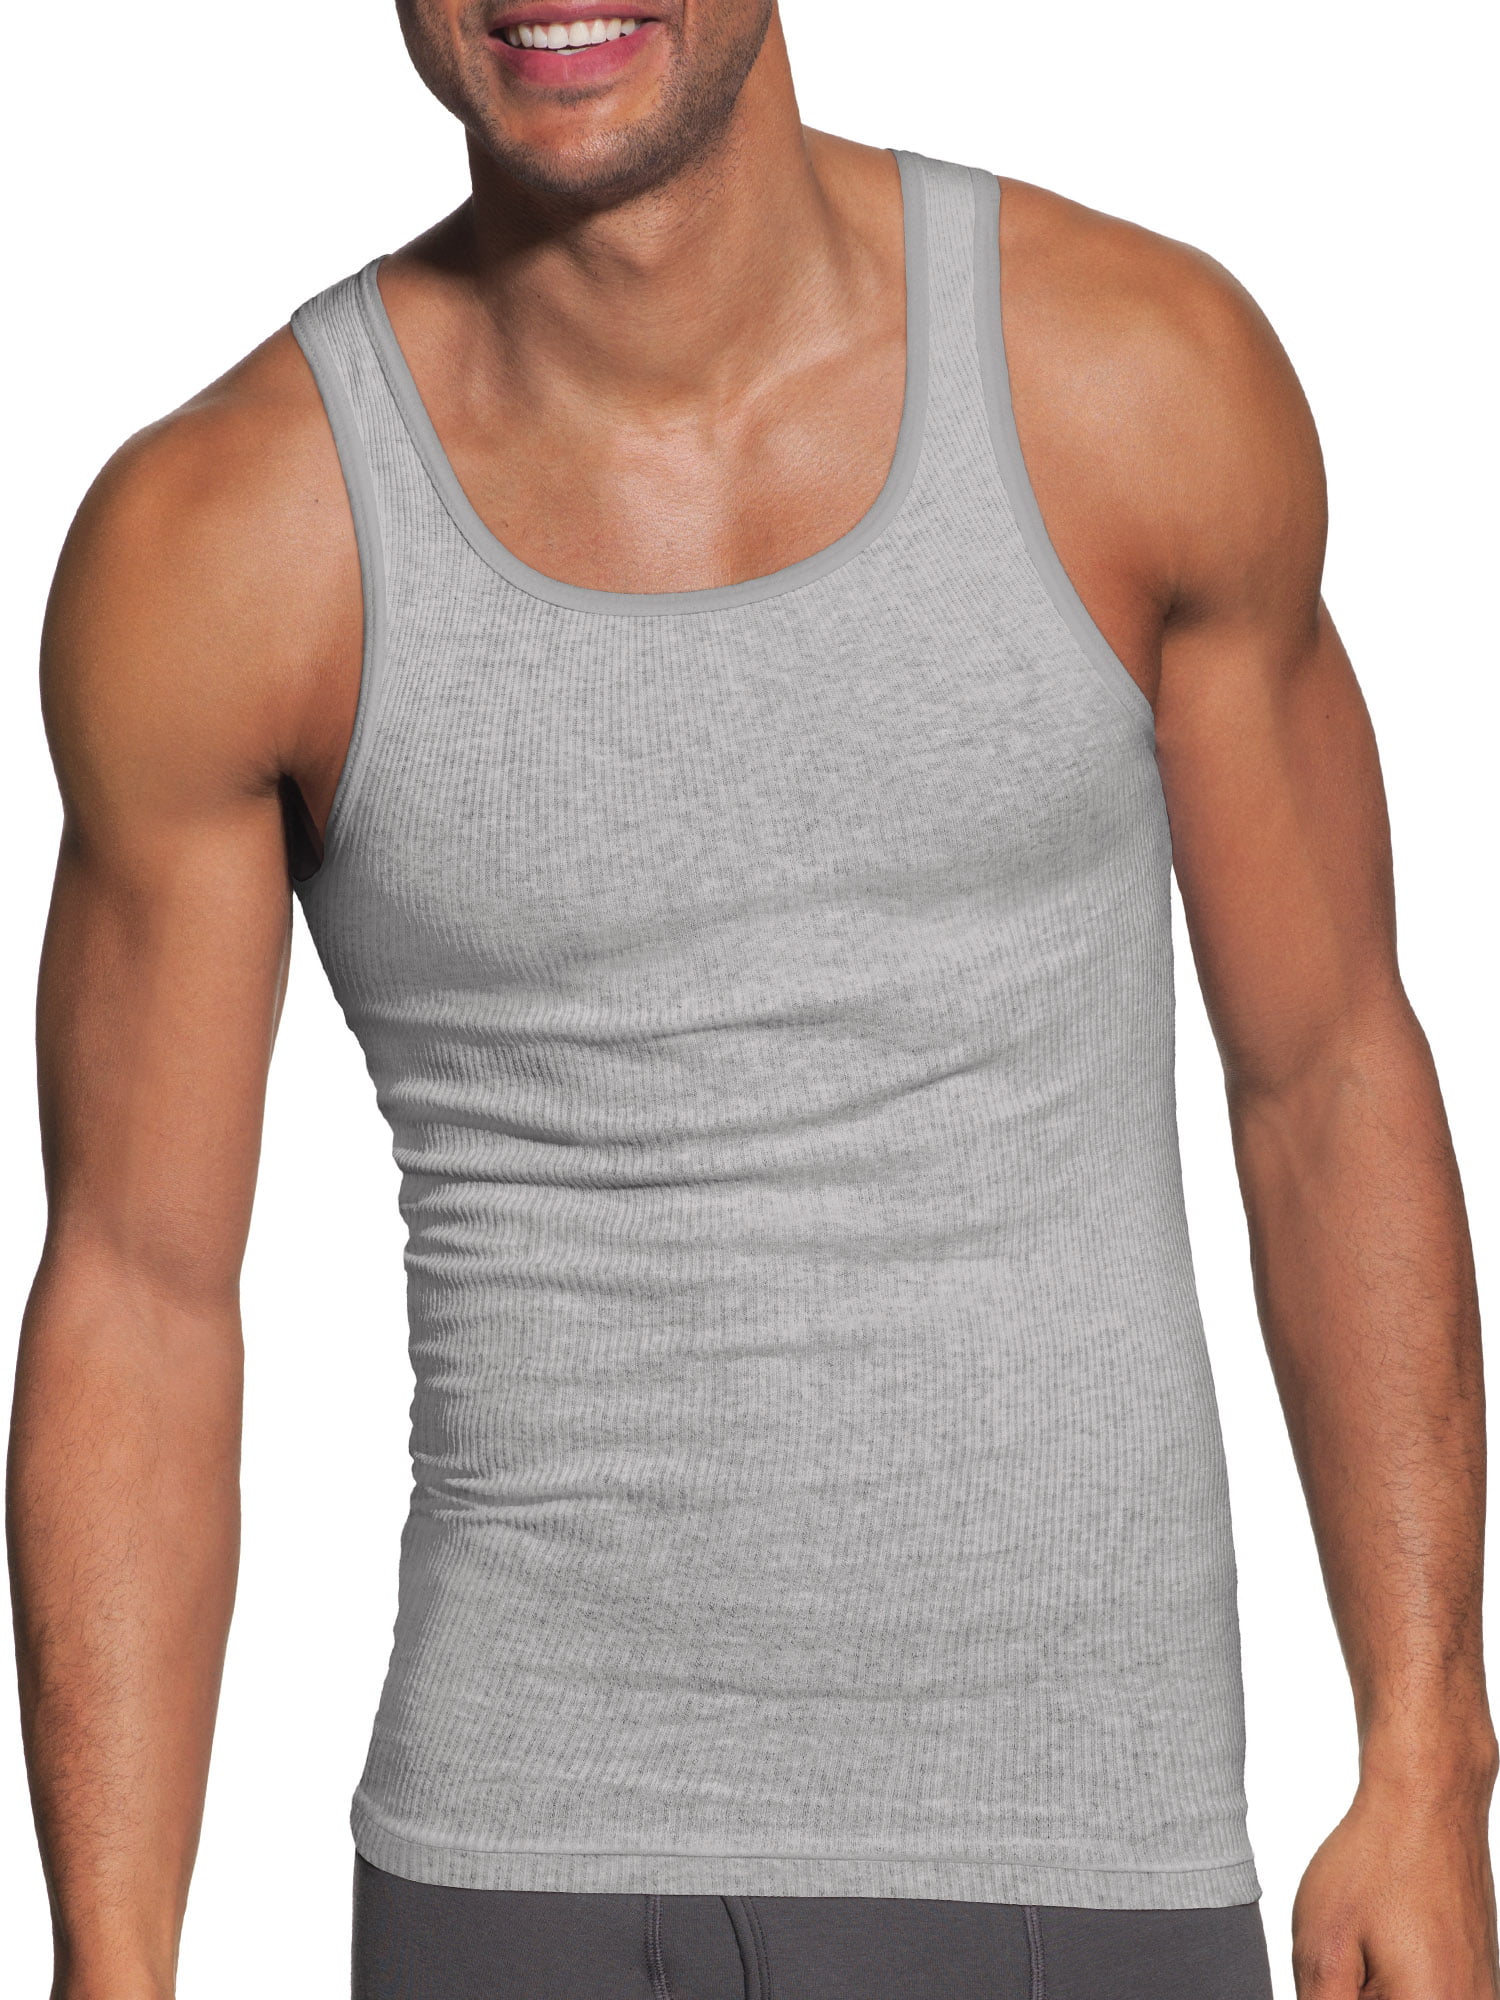 Gray ice dyed Garage Gym Strength muscle tank